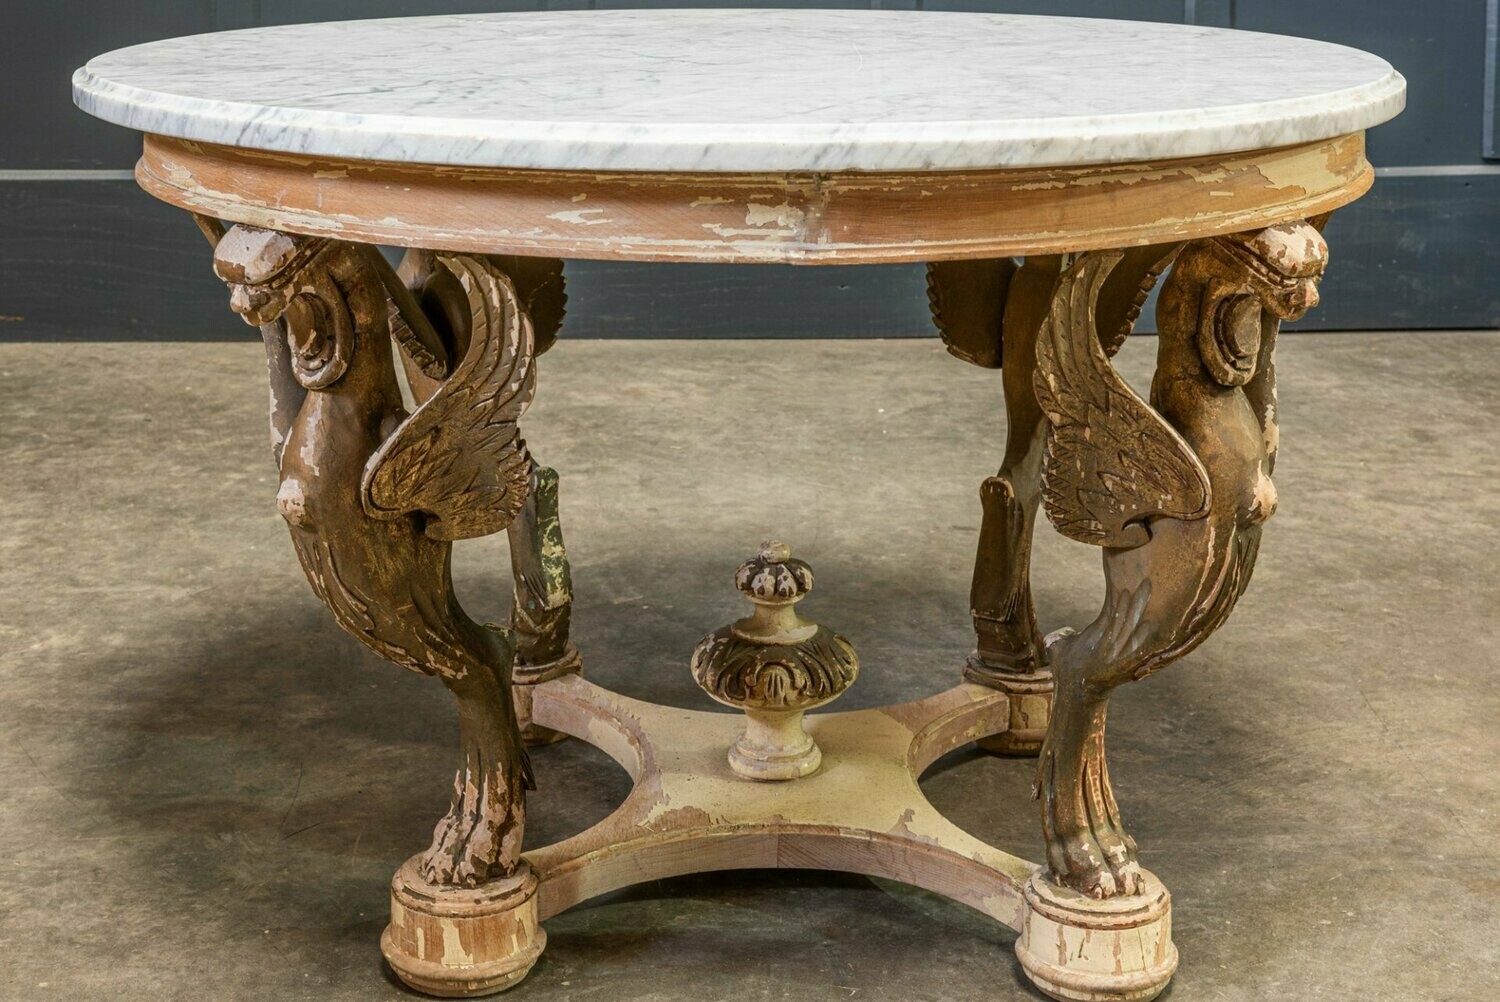 Late 19thc Italian Carved & Guilded Marble Table